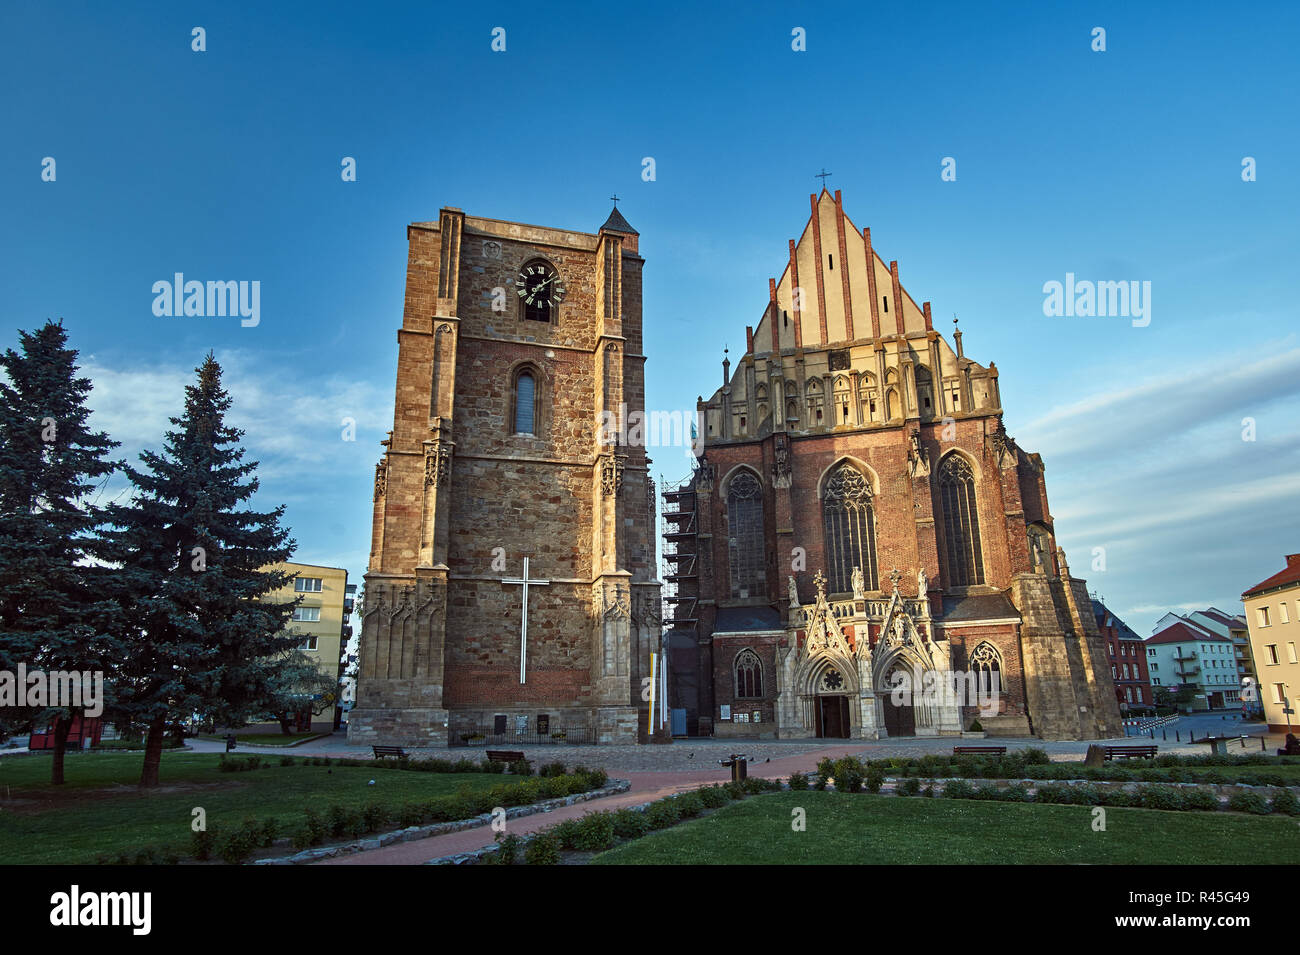 facade of a medieval Roman Catholic church in the Gothic style in Nysa Stock Photo